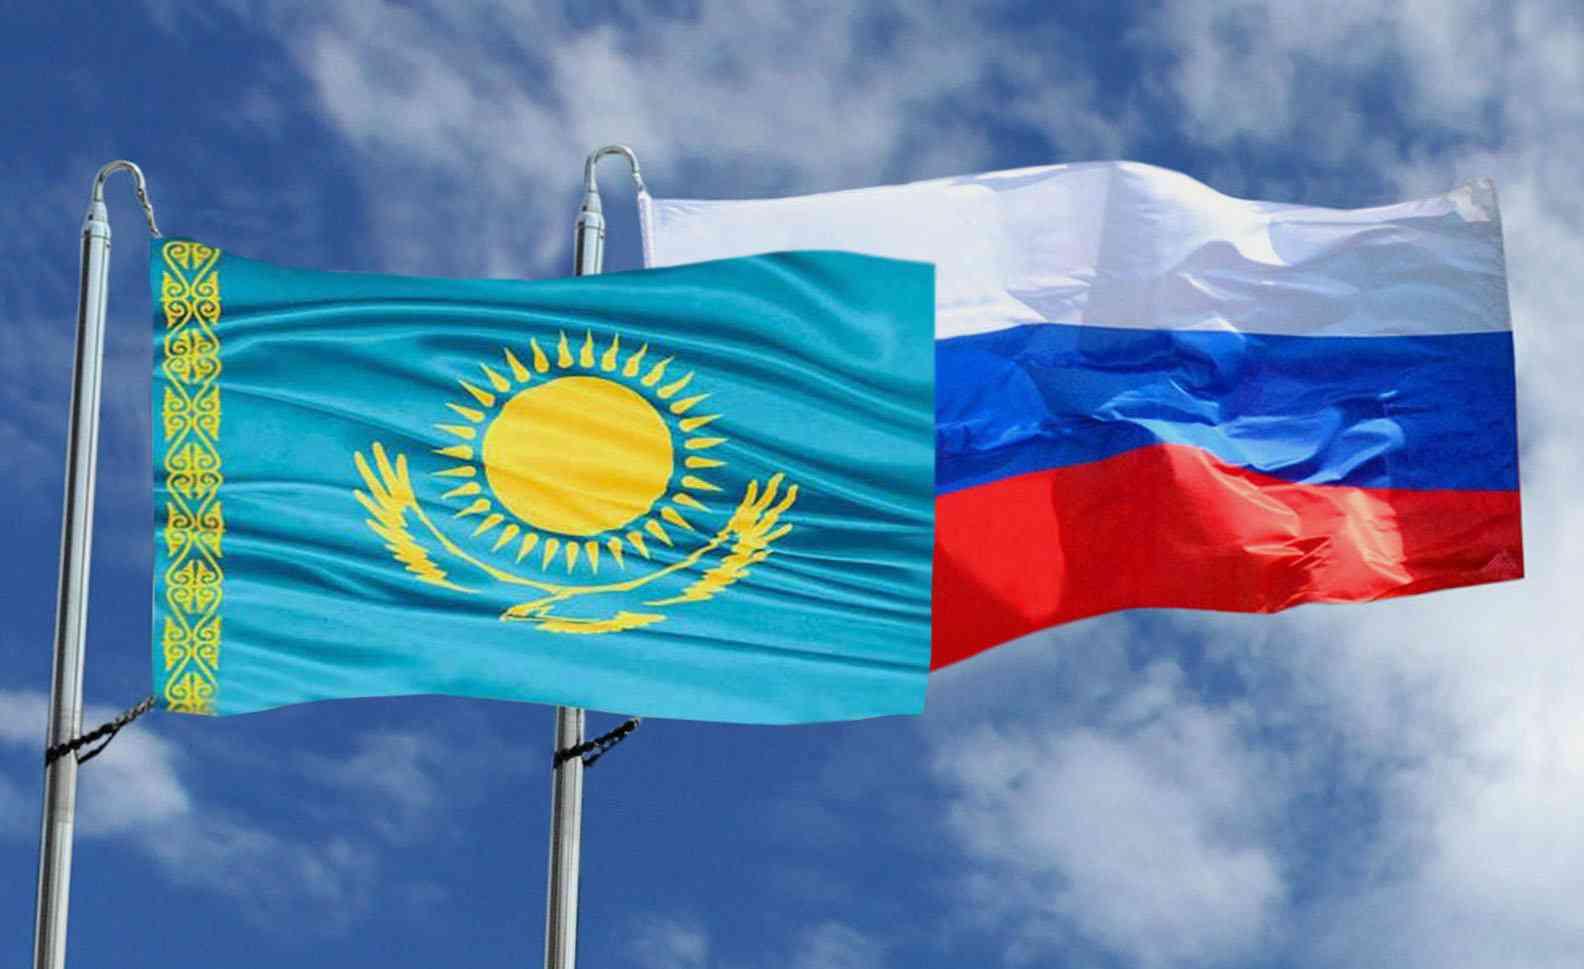 Kazakhstan's medical products manufacturer looking to export goods to Russia